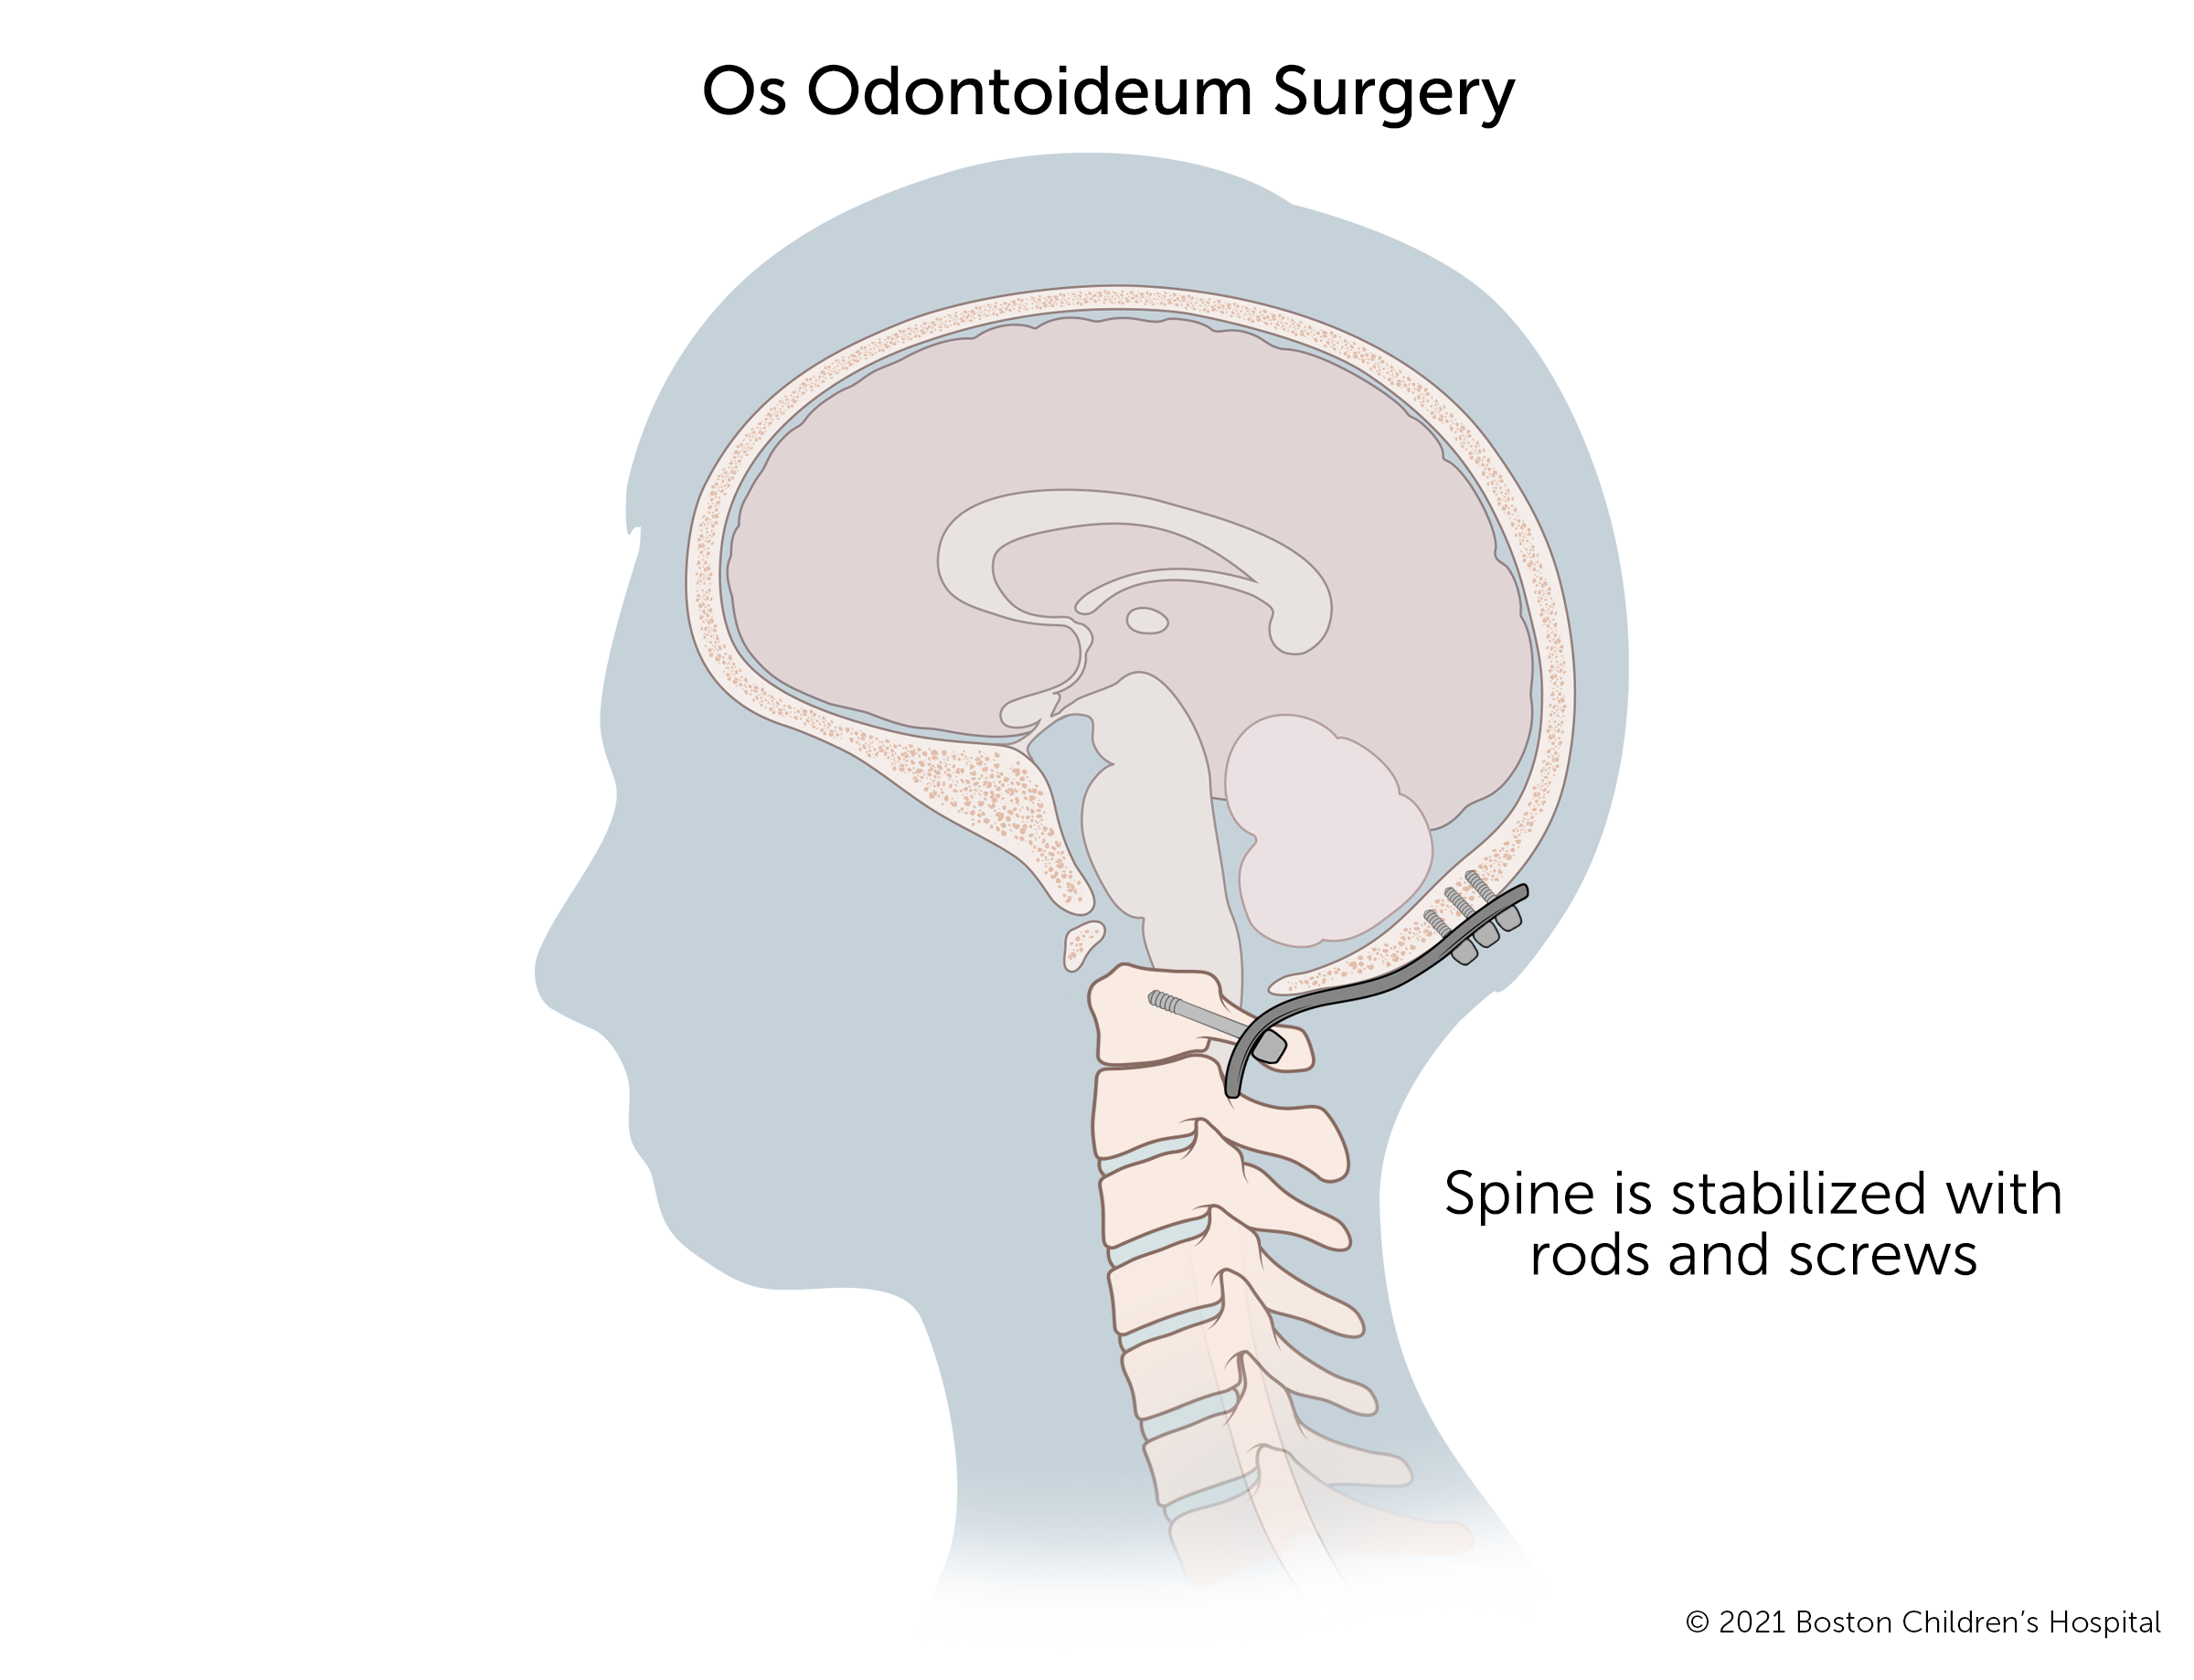 Os odontoid surgery involves aligning the vertebrae in the cervical spine and decompressing the spinal cord. The spine is then stabilized with rods and screws.